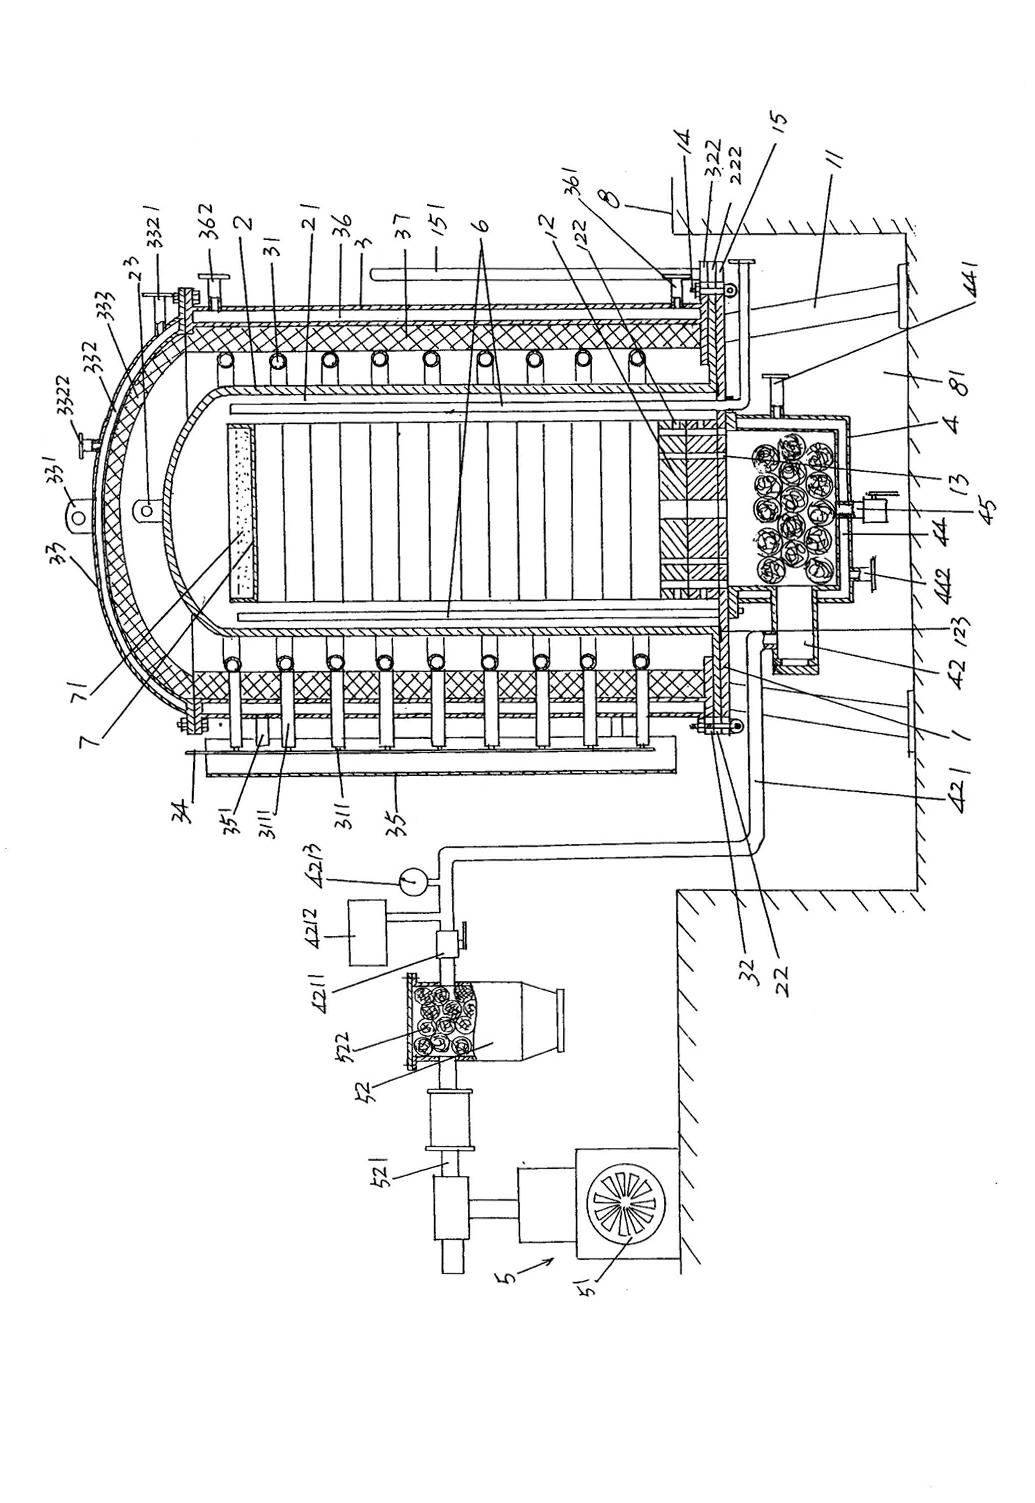 Degreasing device